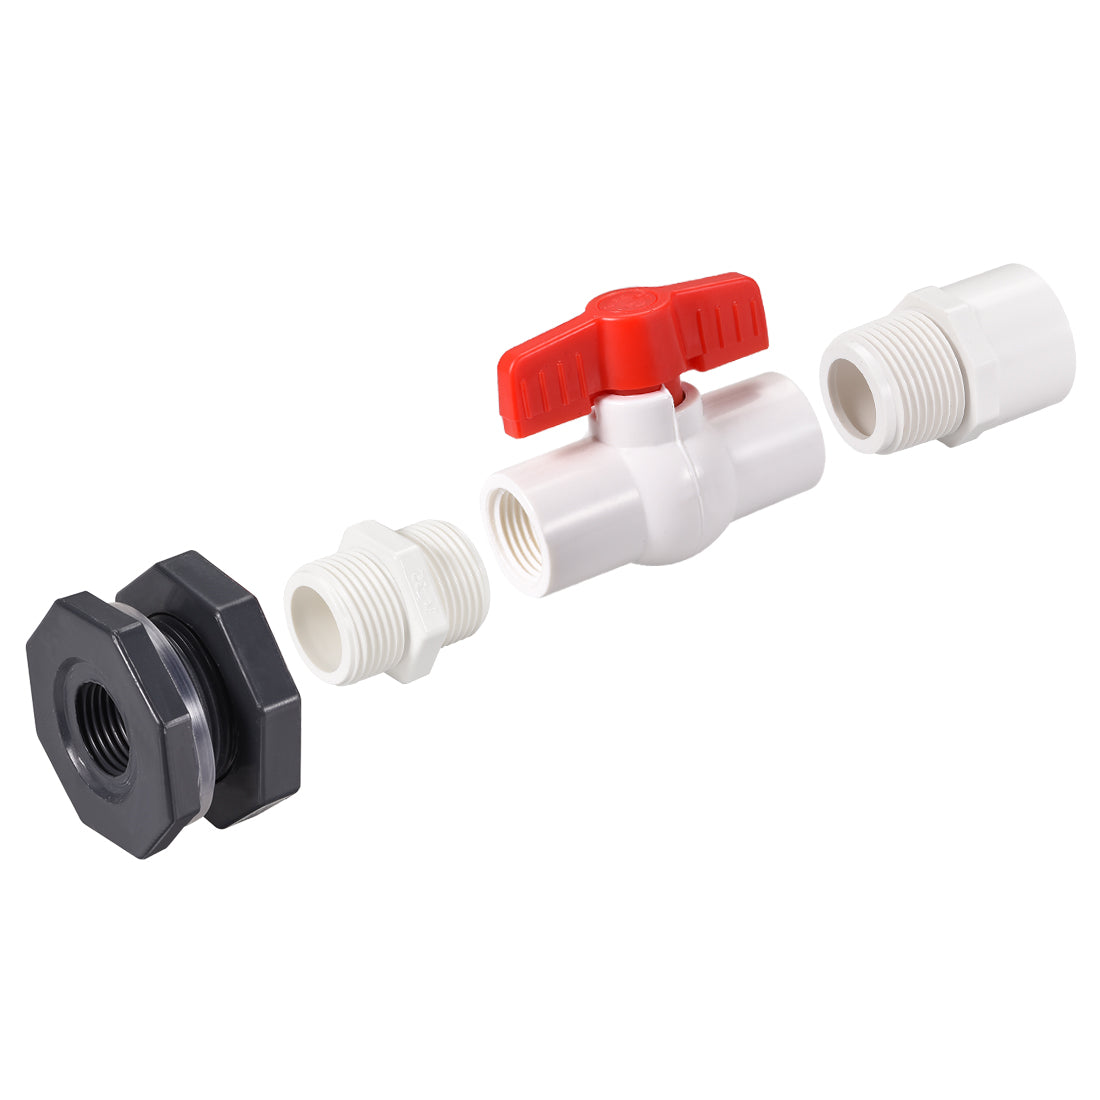 uxcell Uxcell PVC Ball Valve Connector Spigot Kit G1/2, with Bulkhead, Grey White Red 2Pcs